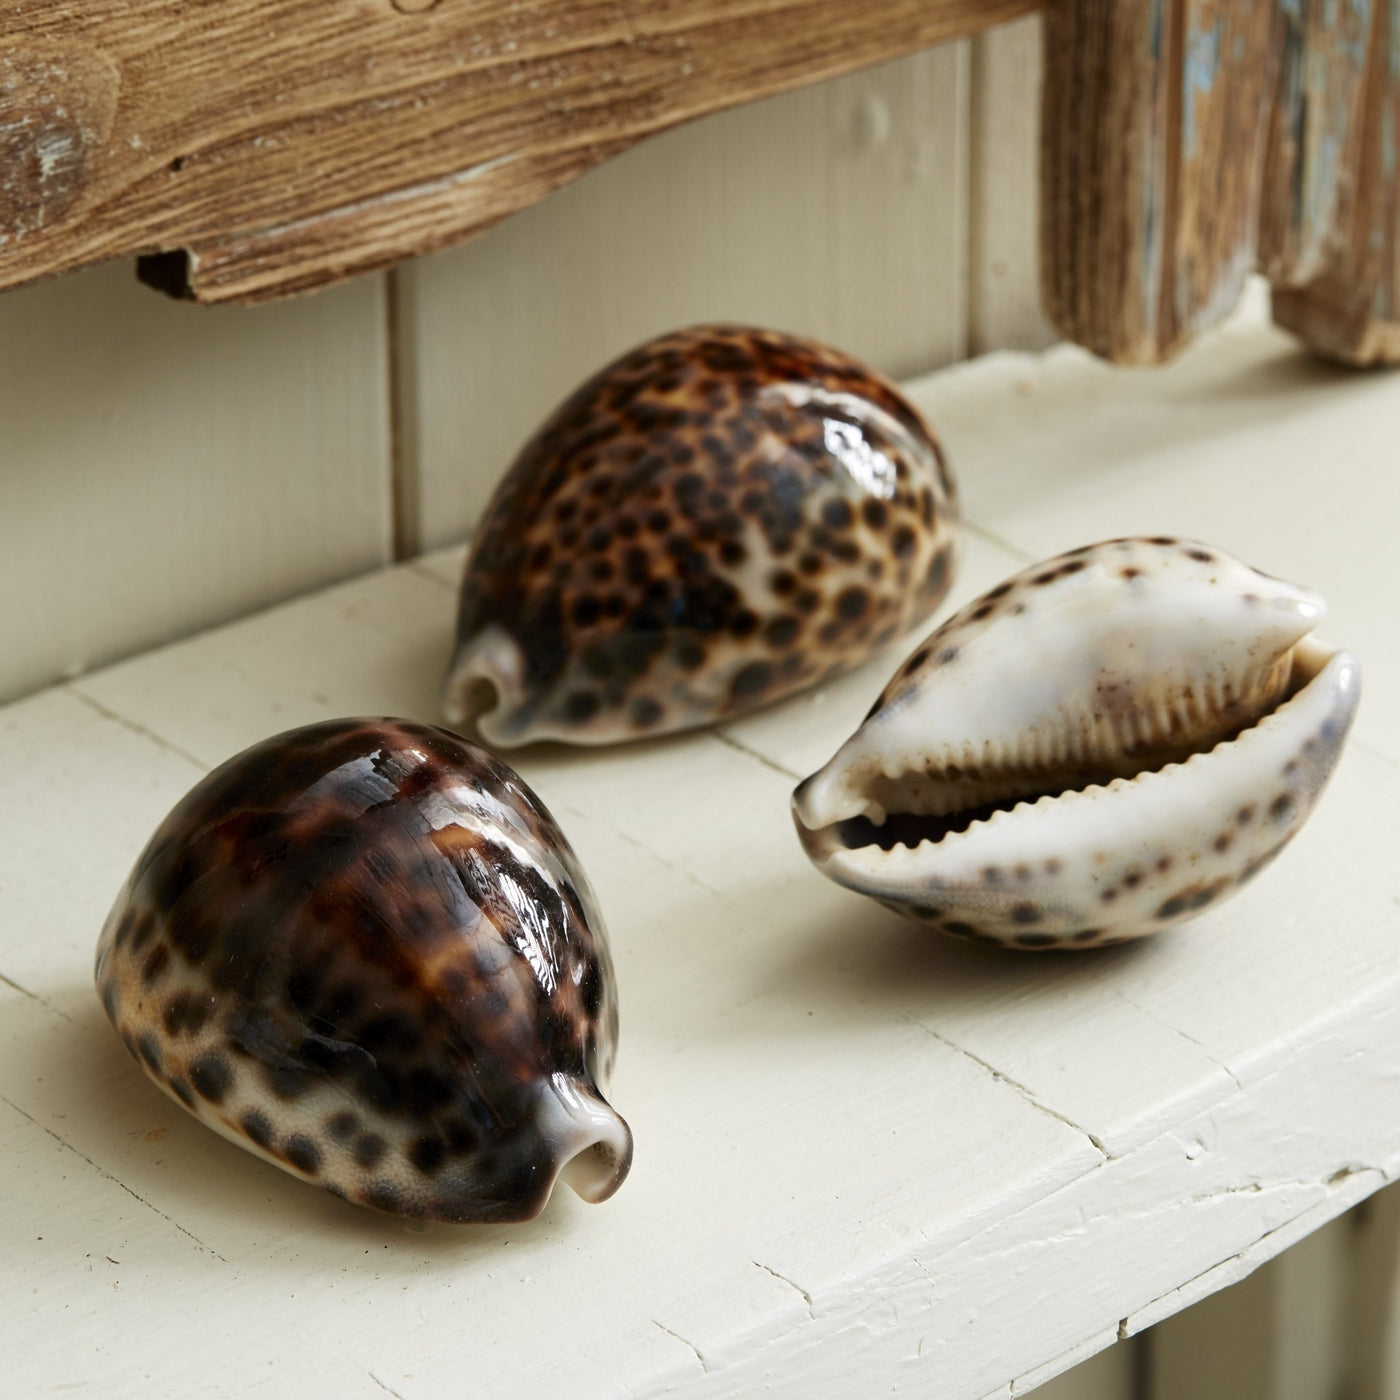 Set Of 3 Tiger Cowrie Shells - LIVE LAUGH LOVE LIMITED